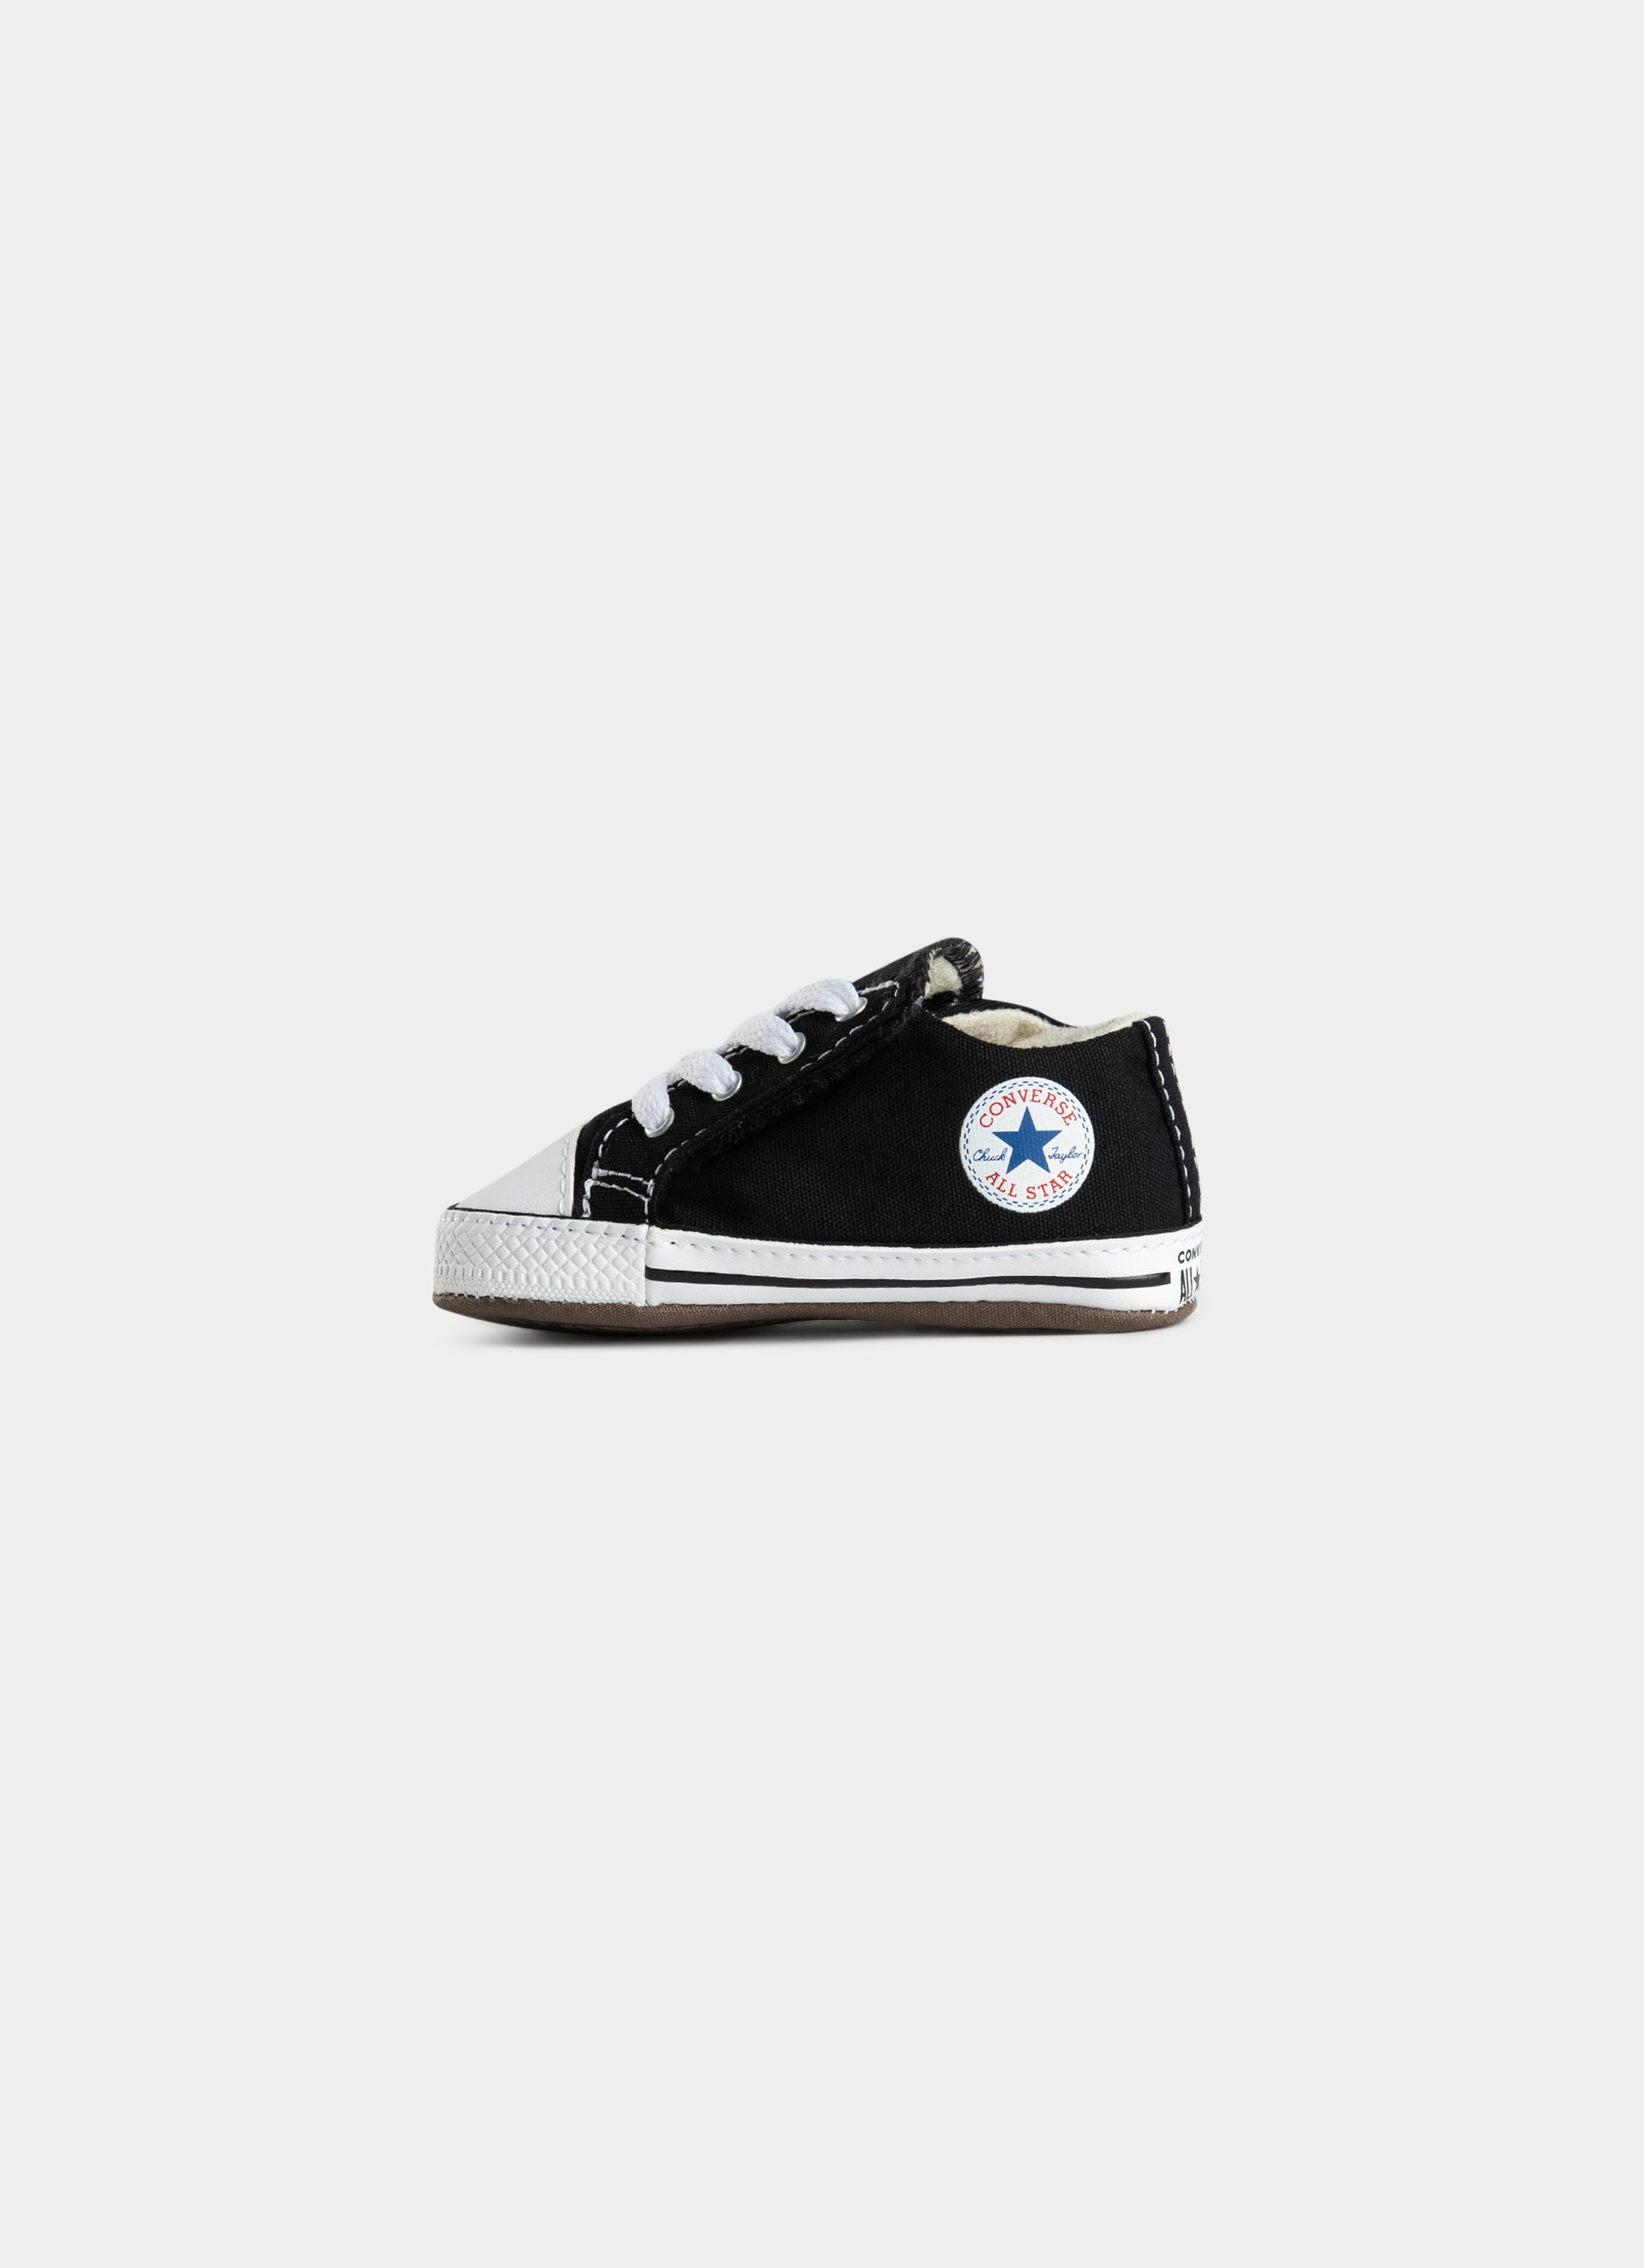 Converse Chuck Taylor First Star Shoe - Infant in Black | Red Rat